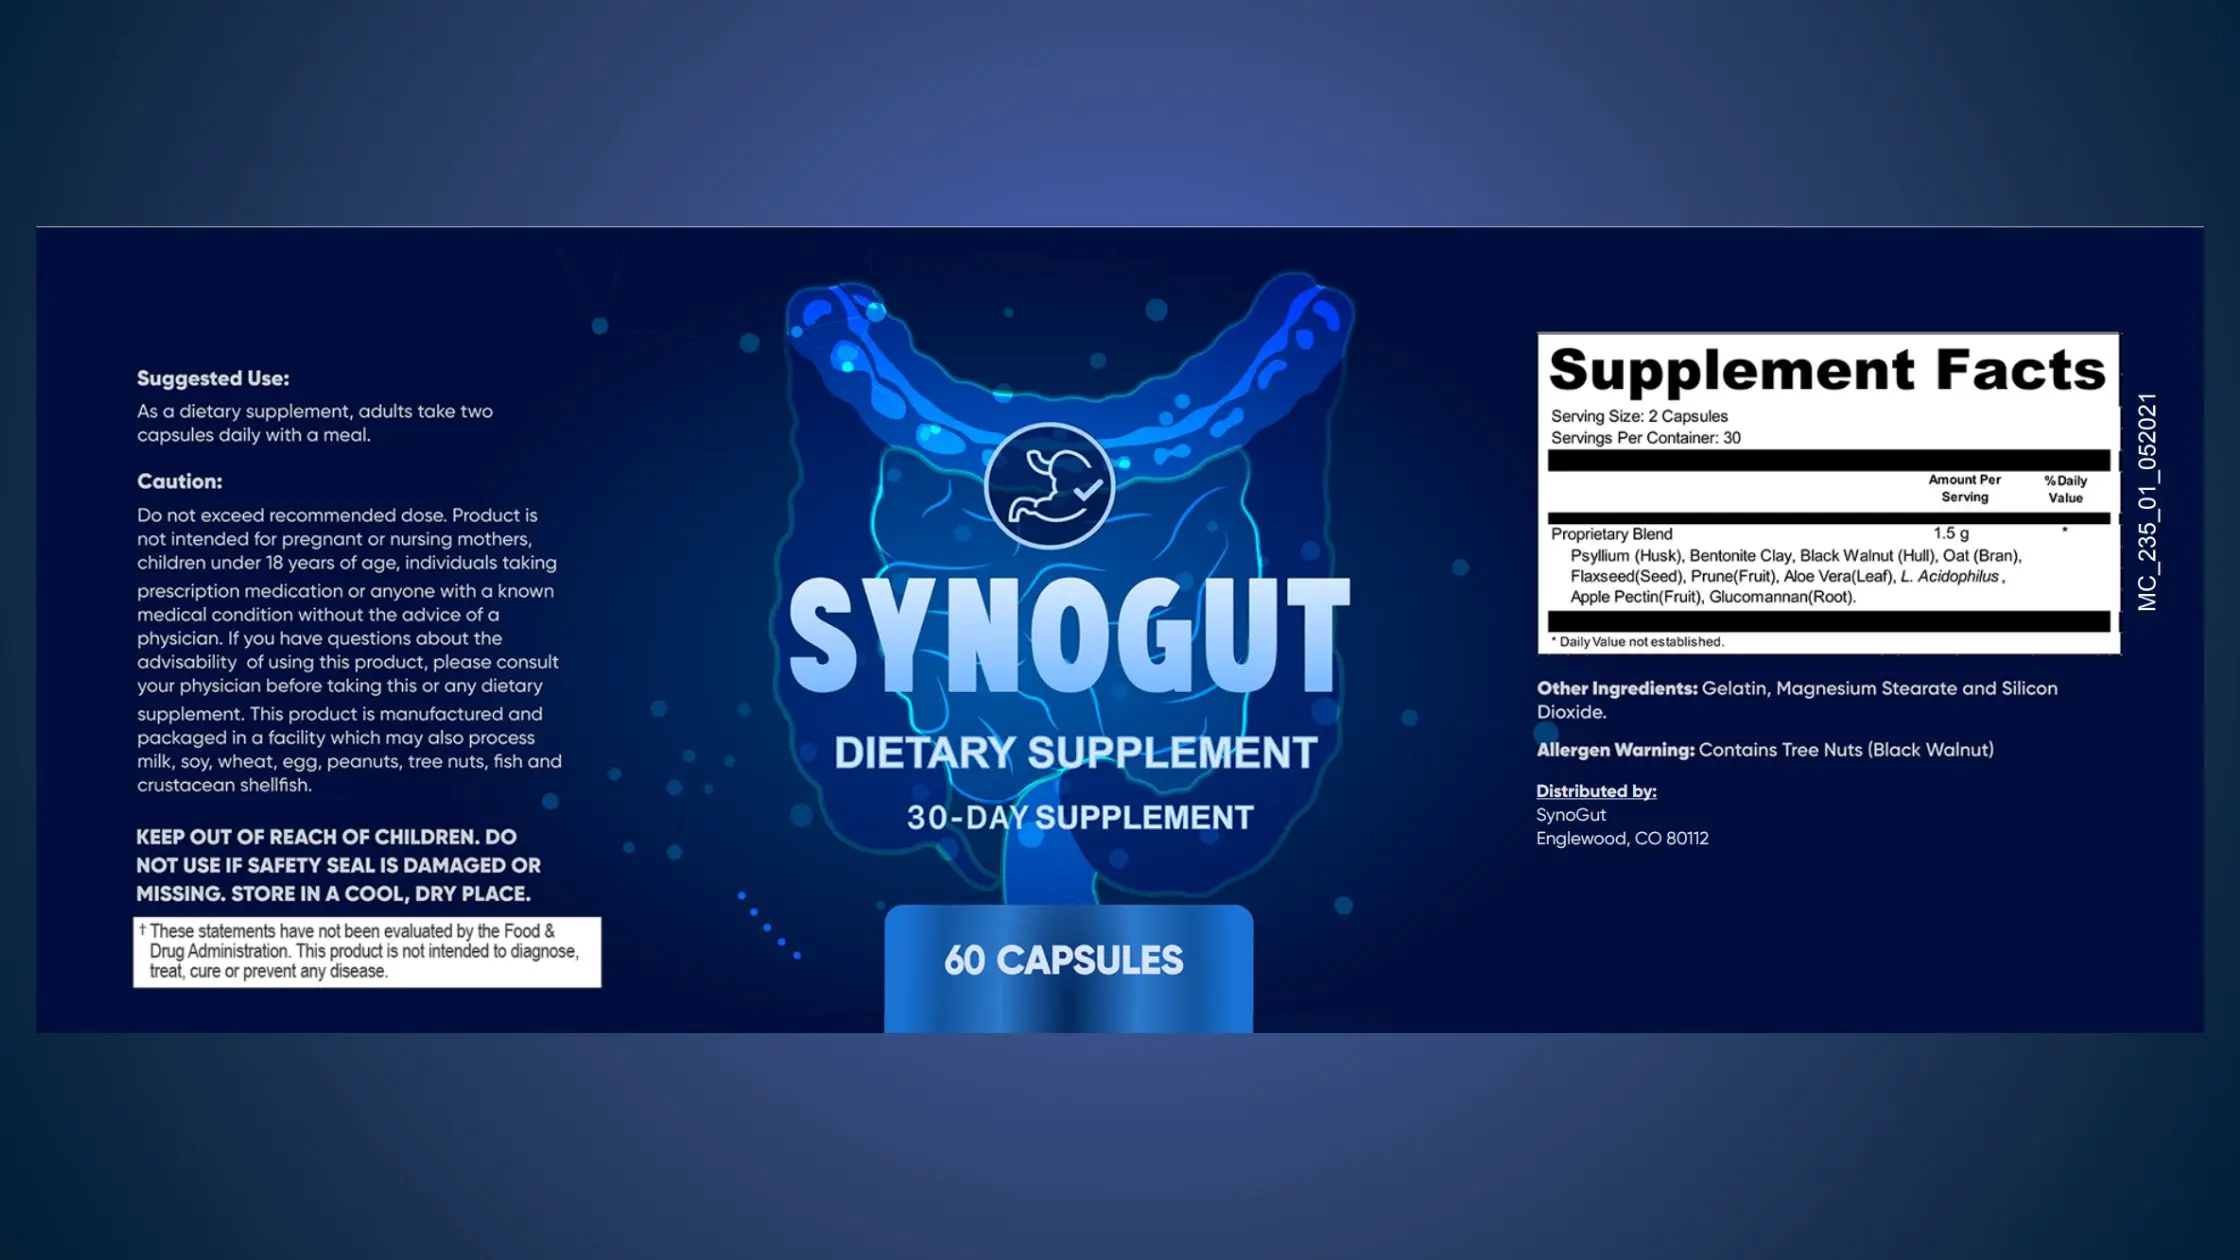 SynoGut Supplement Facts